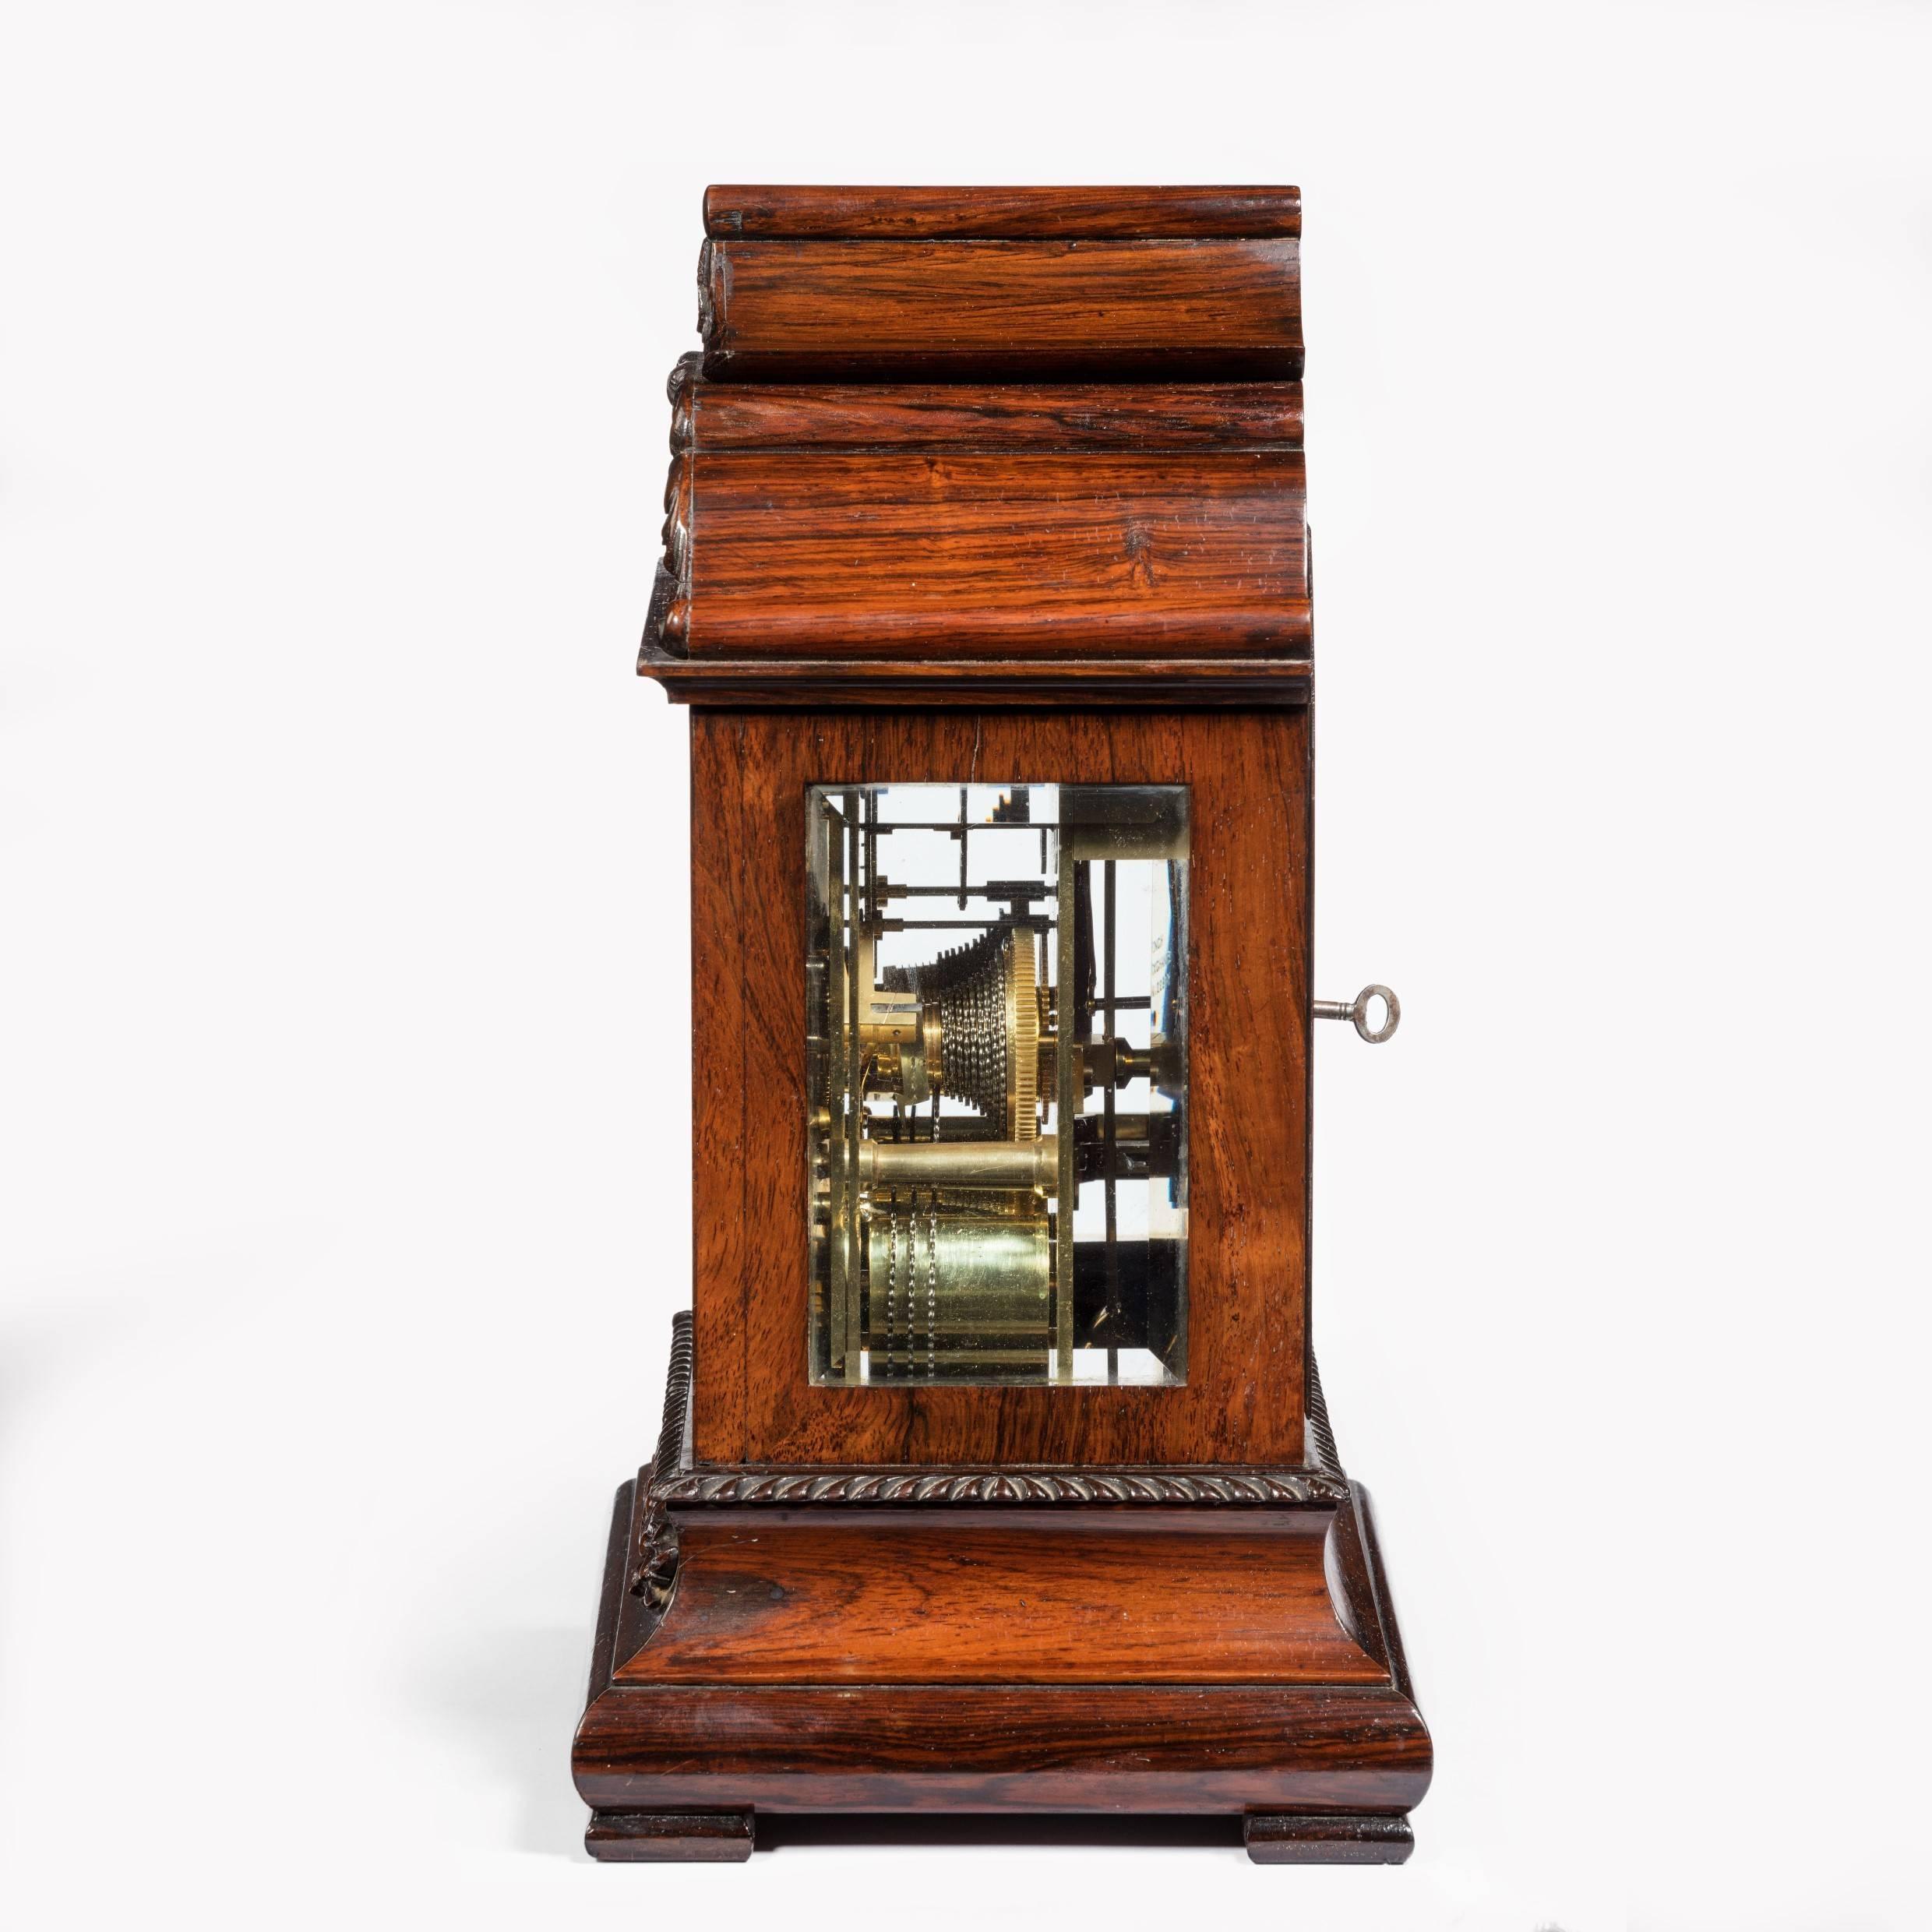 Late William IV Rosewood Bracket Clock by French, Royal Exchange, London In Good Condition For Sale In Lymington, Hampshire